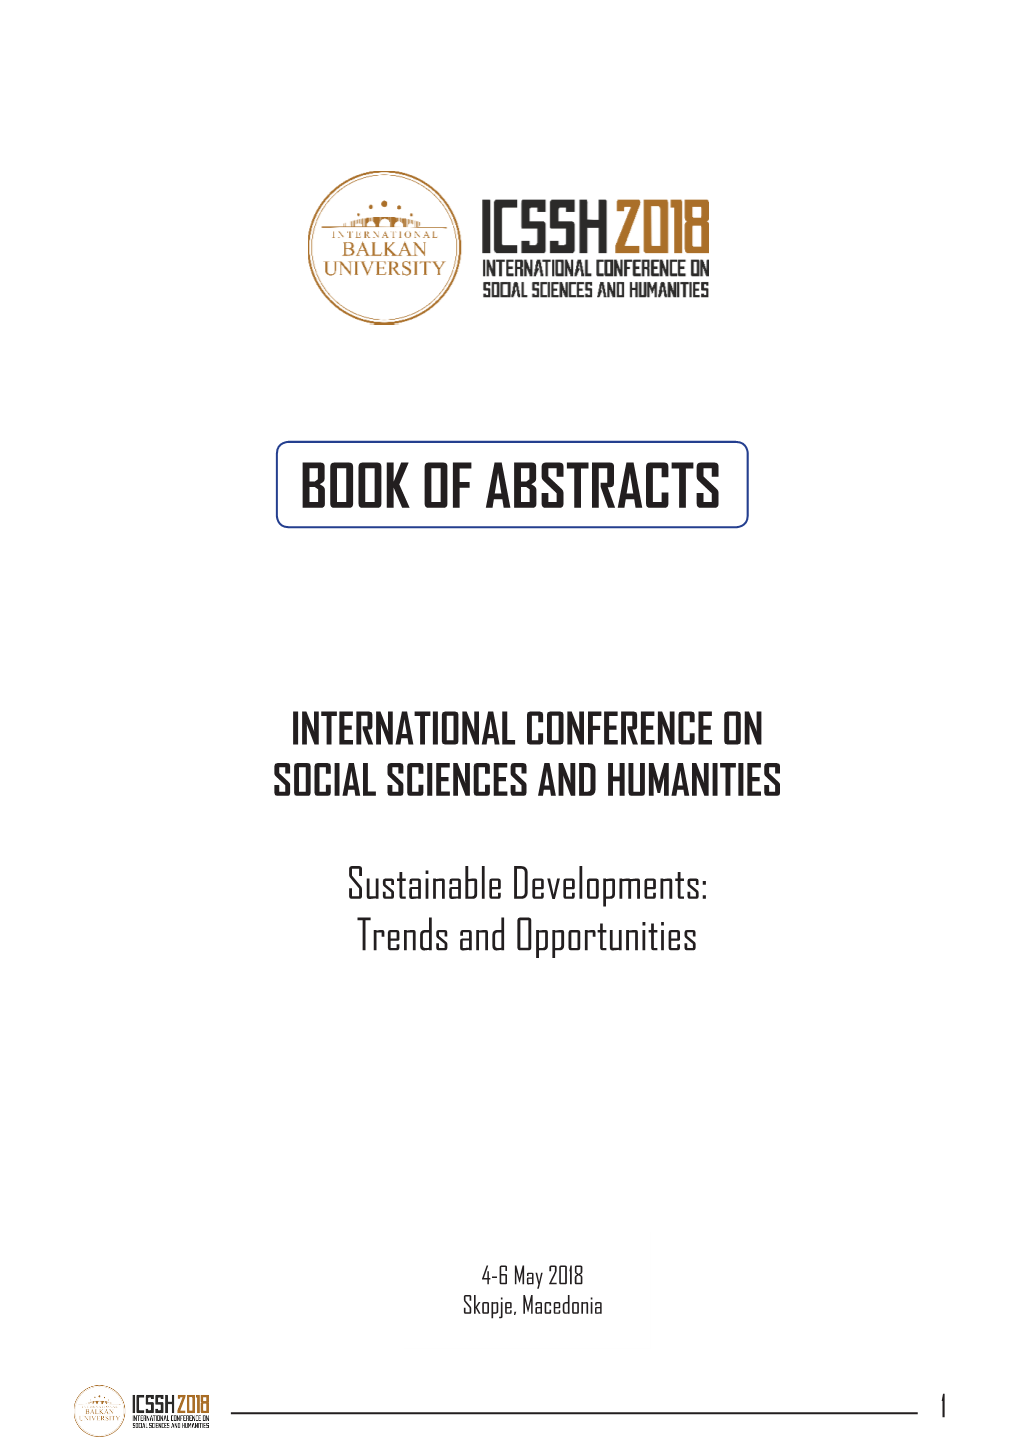 Book of Abstracts INTERNATIONAL CONFERENCE on SOCIAL SCIENCES and HUMANITIES “Sustainable Developments: Trends and Opportunities”